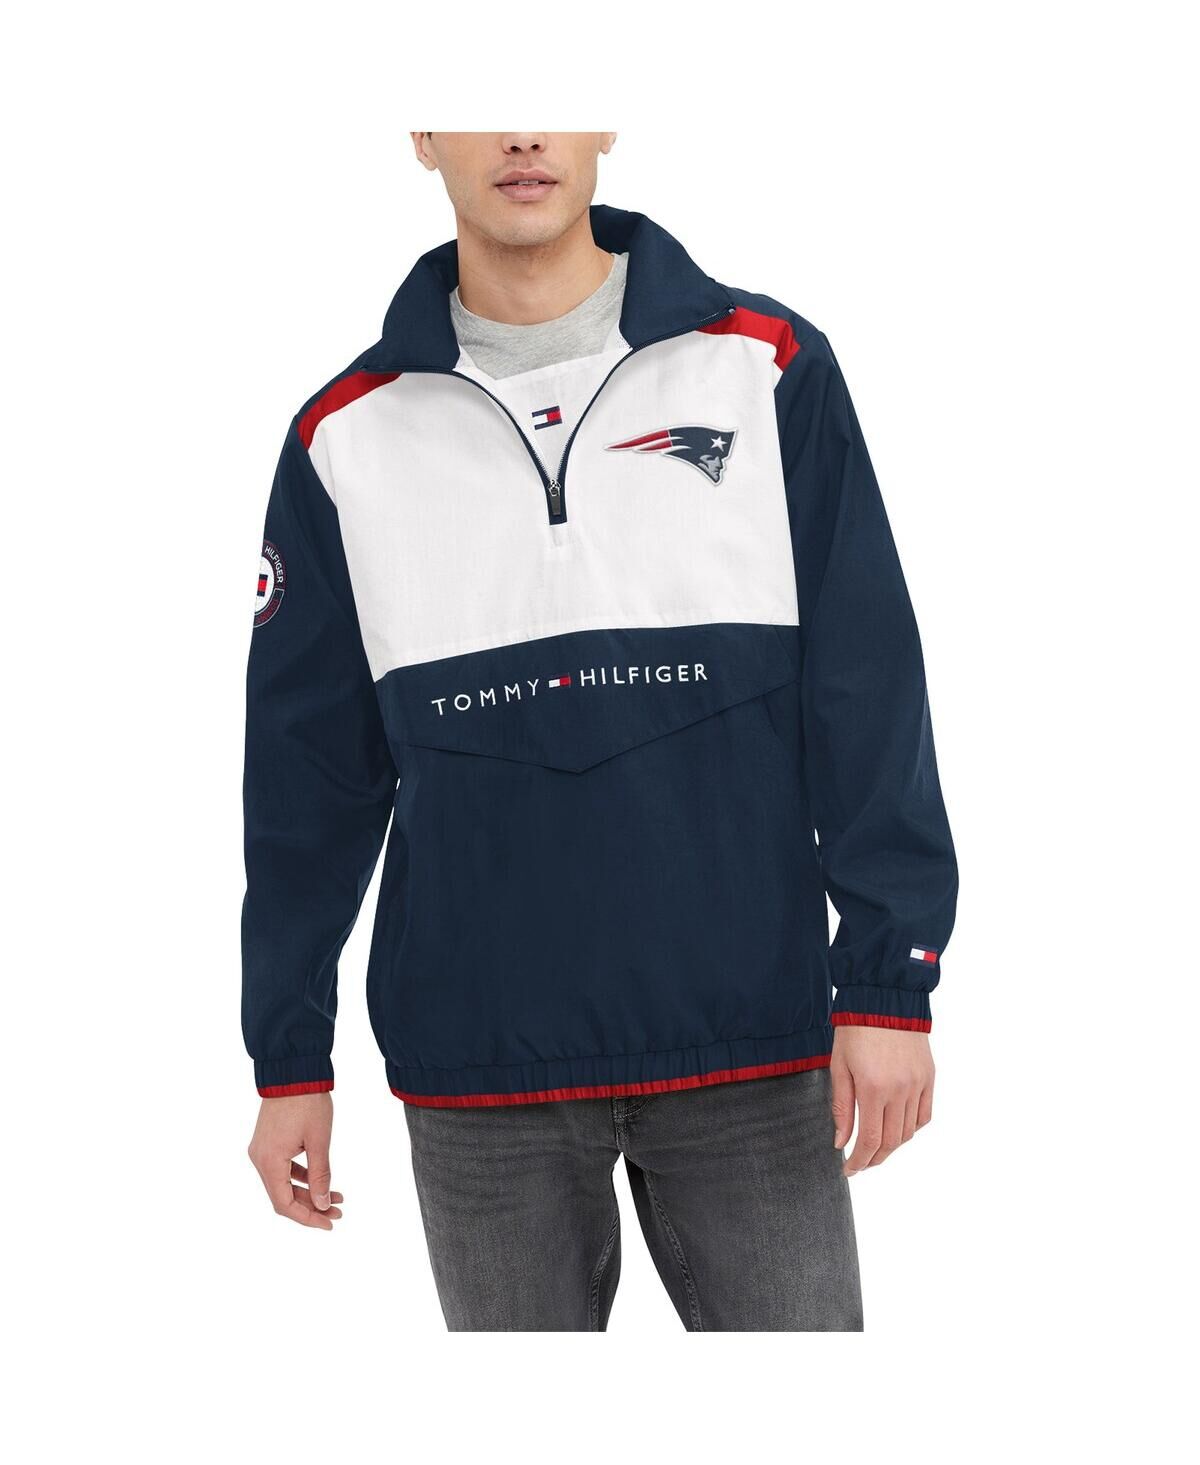 Tommy Hilfiger Men's Tommy Hilfiger Navy, White New England Patriots Carter Half-Zip Hooded Top - Navy, White